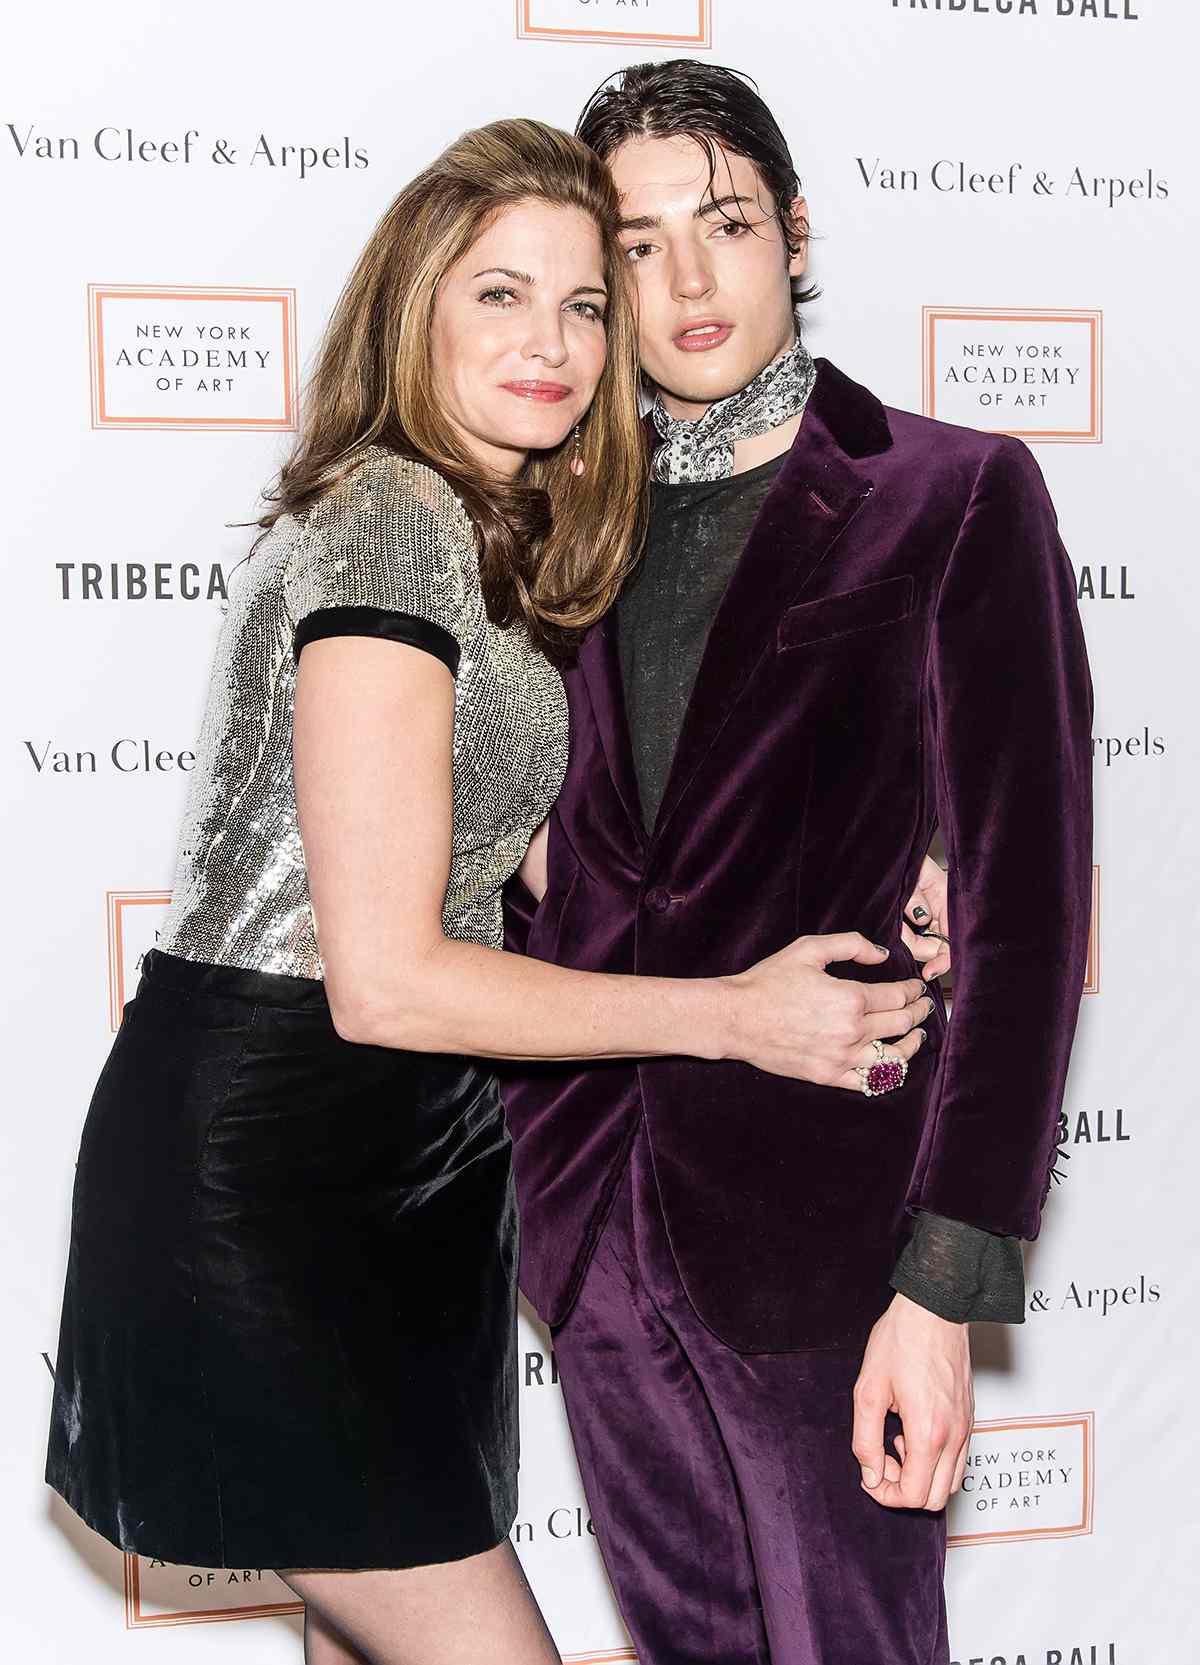 Harry Brant's Close Relationship with Stephanie Seymour